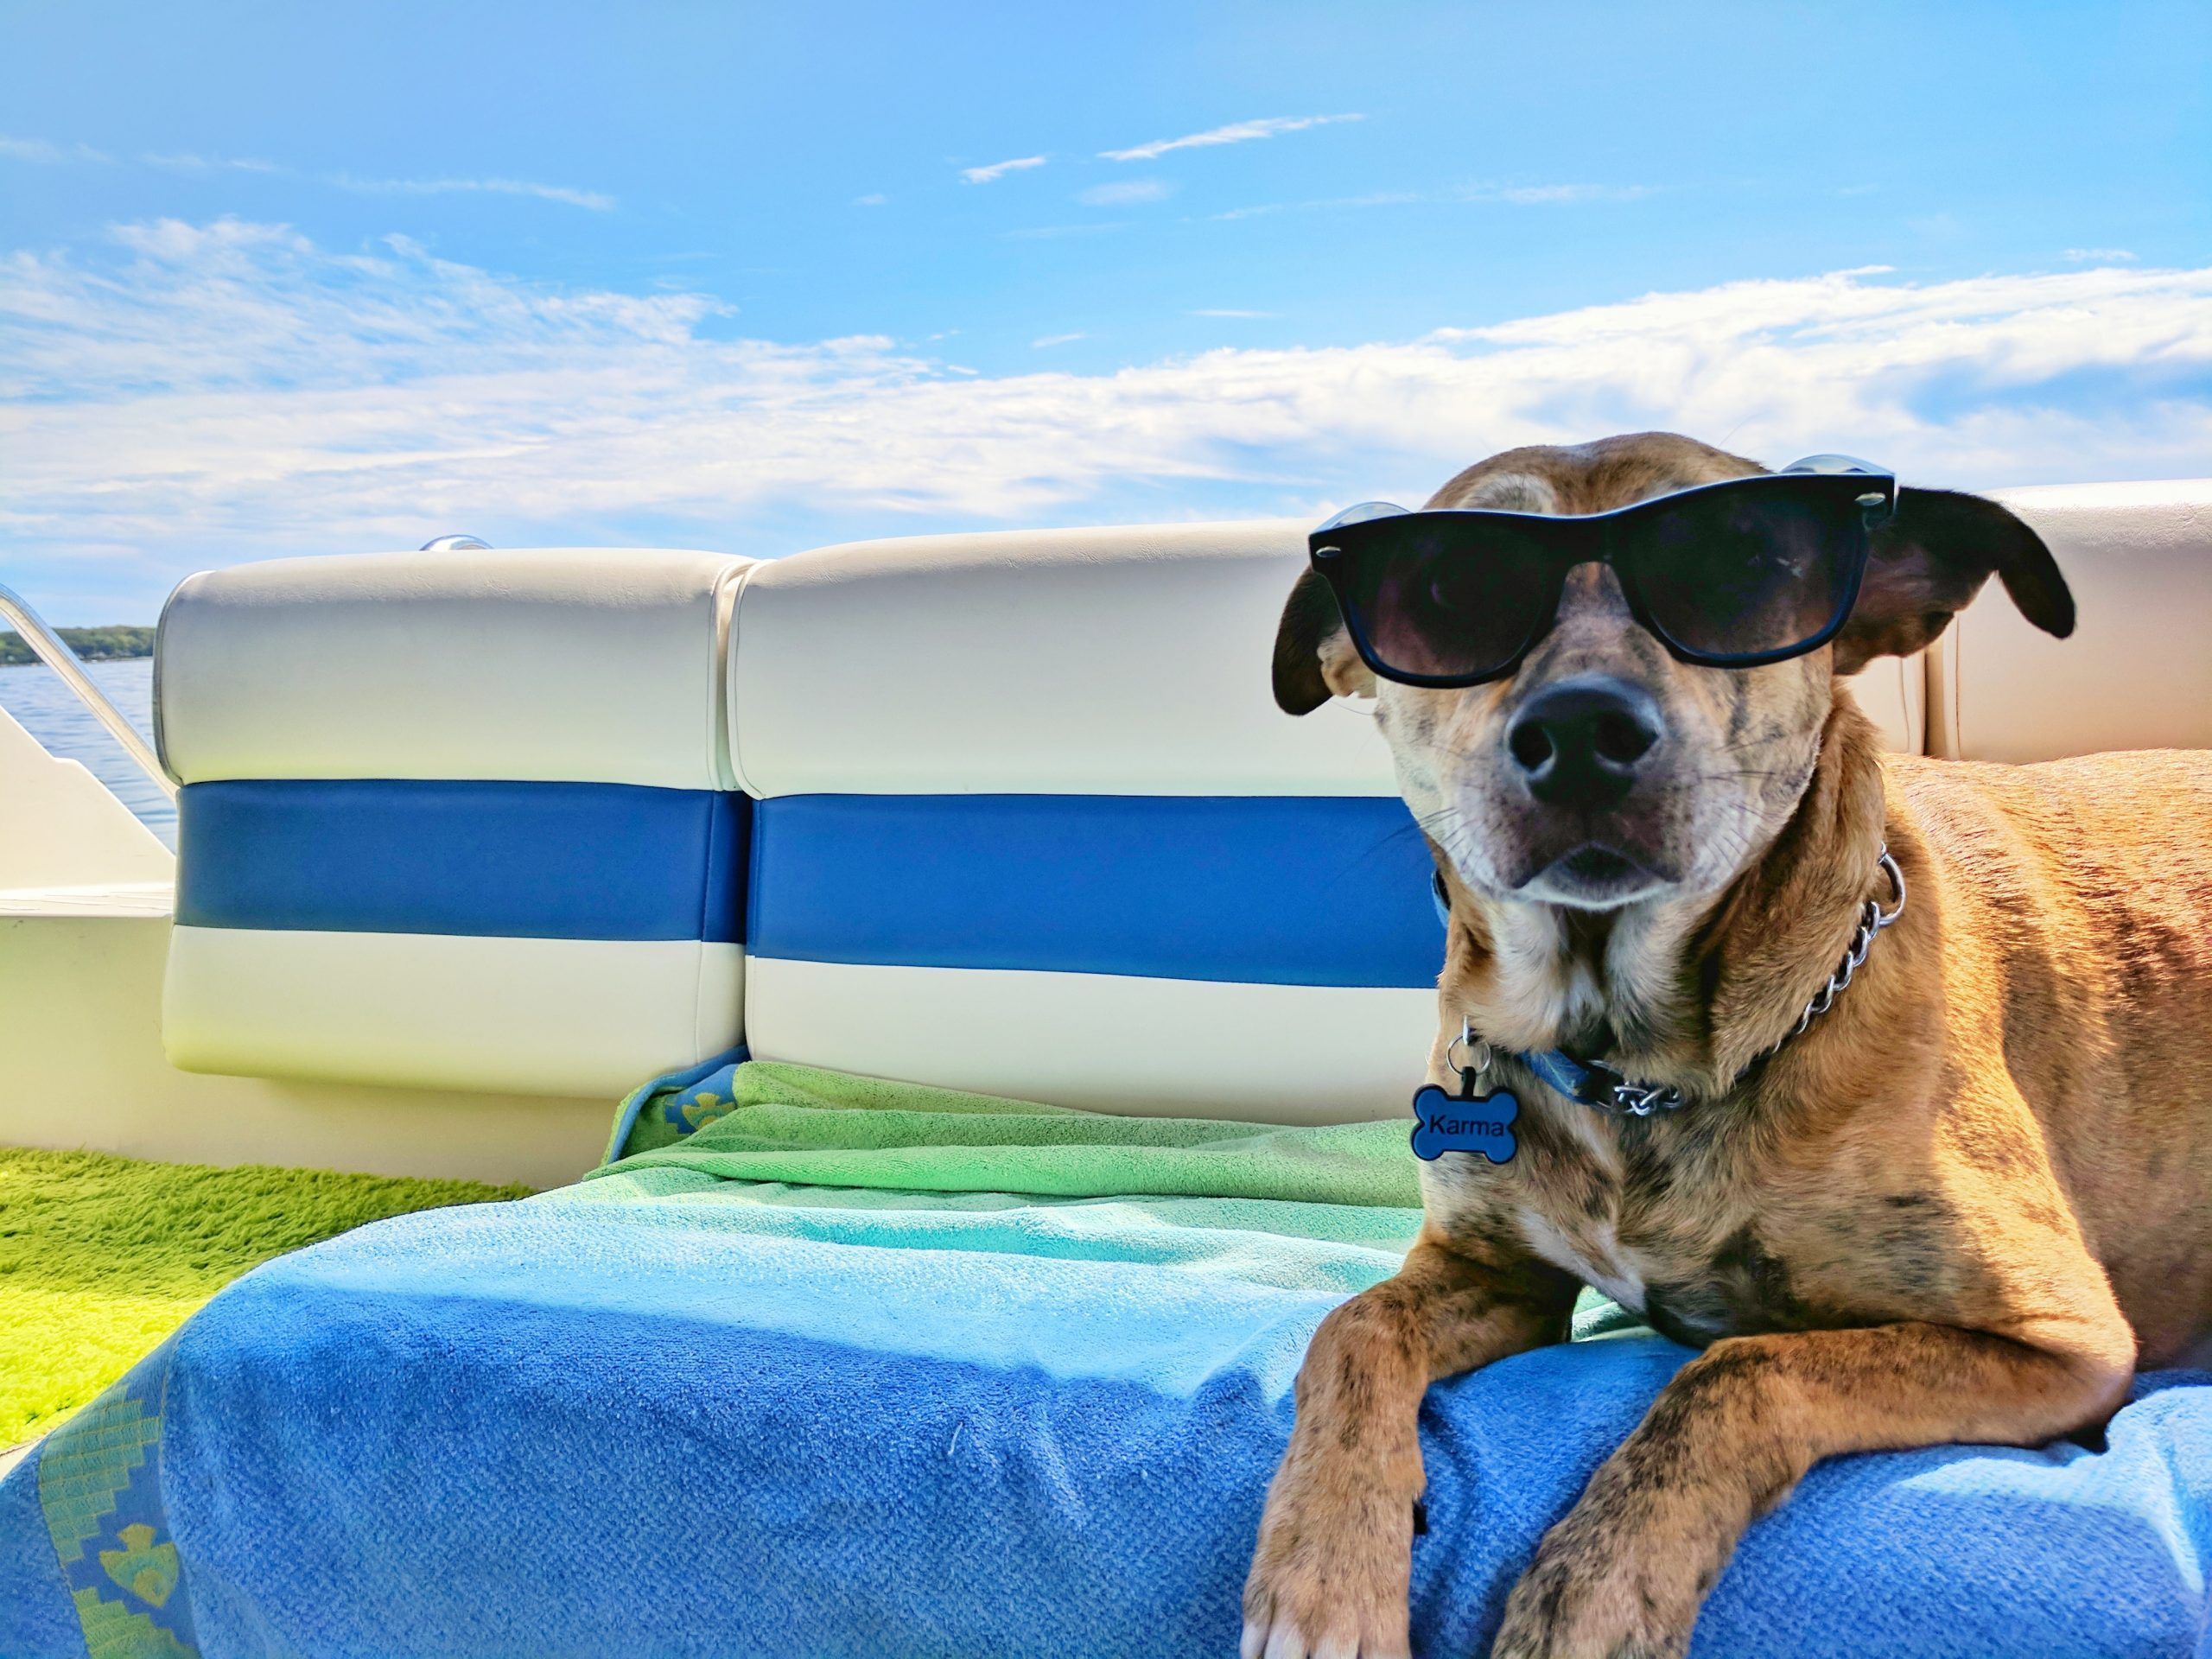 Brown dog wearing sunglasses on boat